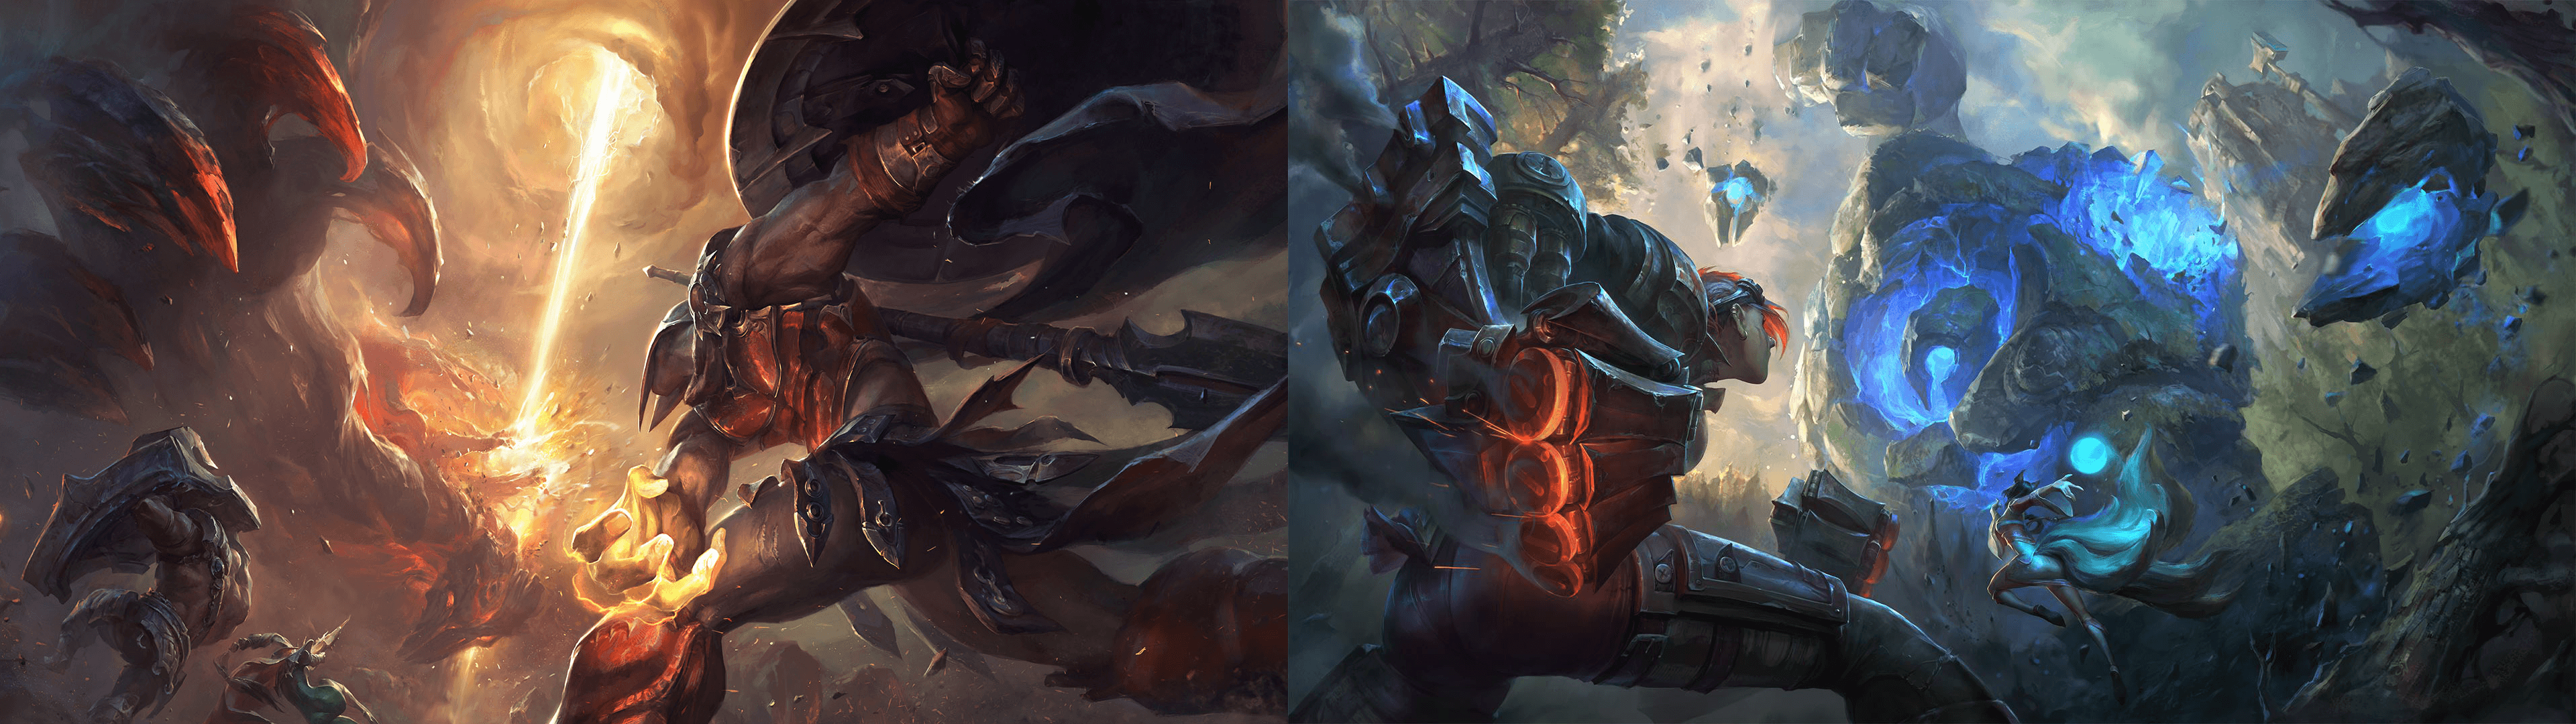 League Of Legends Dual Screen Wallpapers Top Free League Of Images, Photos, Reviews